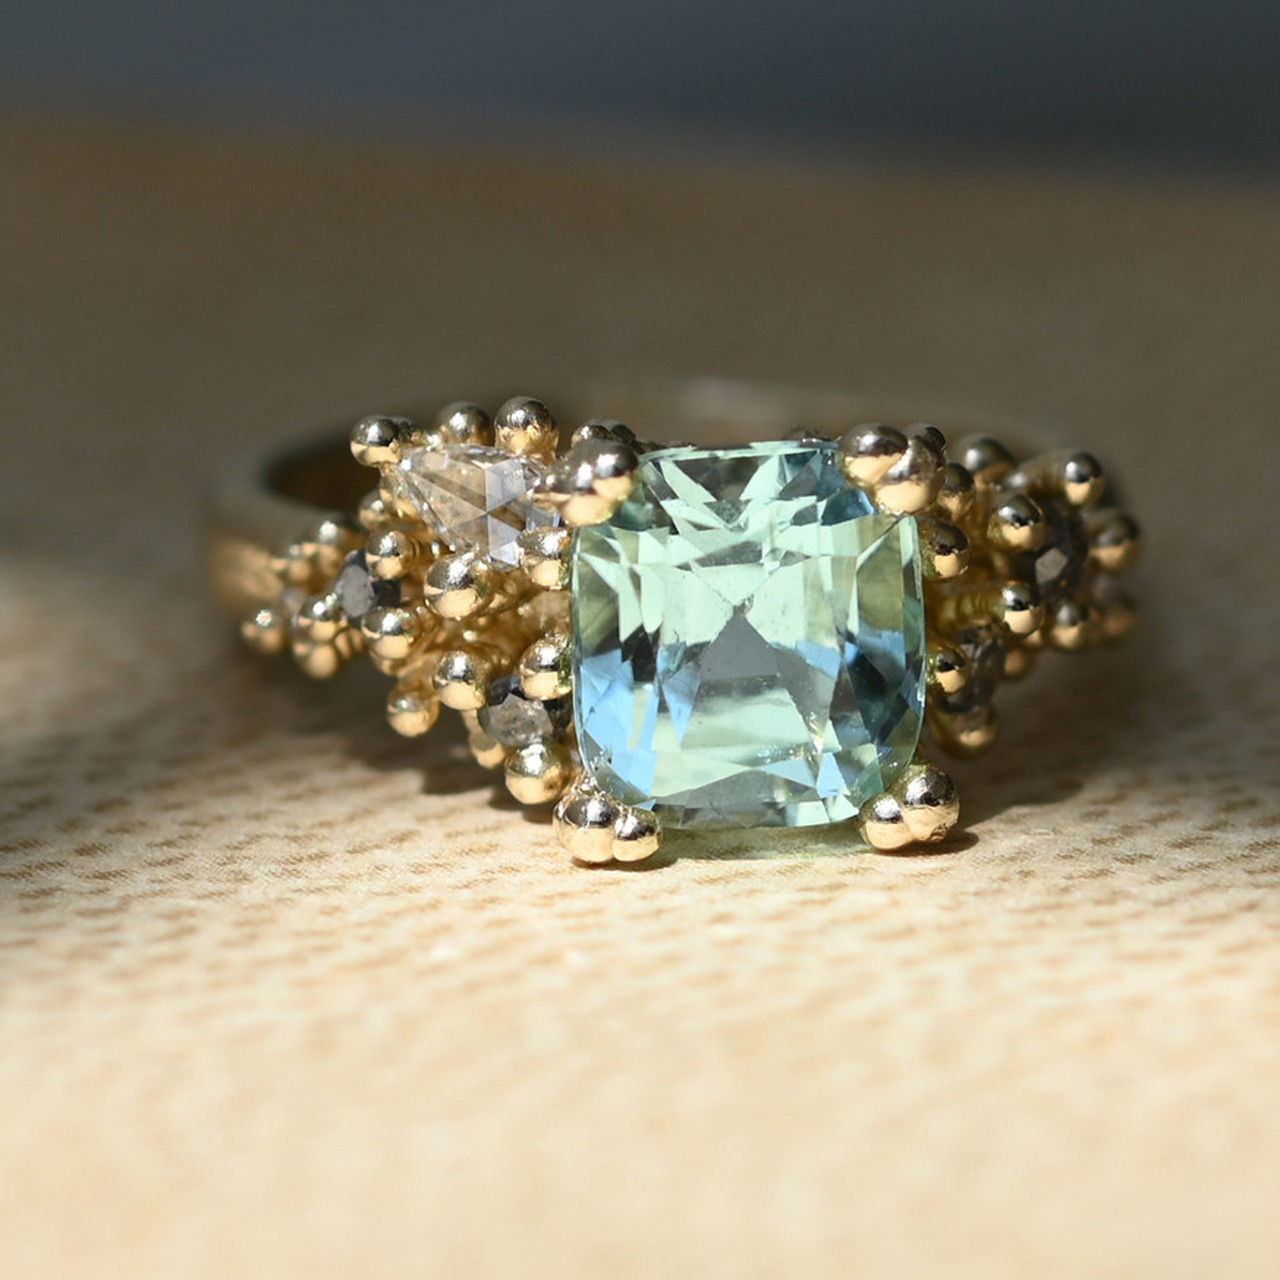 tf Exclusive Mint Tourmaline and Mixed Diamond Encrusted Ring, Ruth Tomlinson, tomfoolery